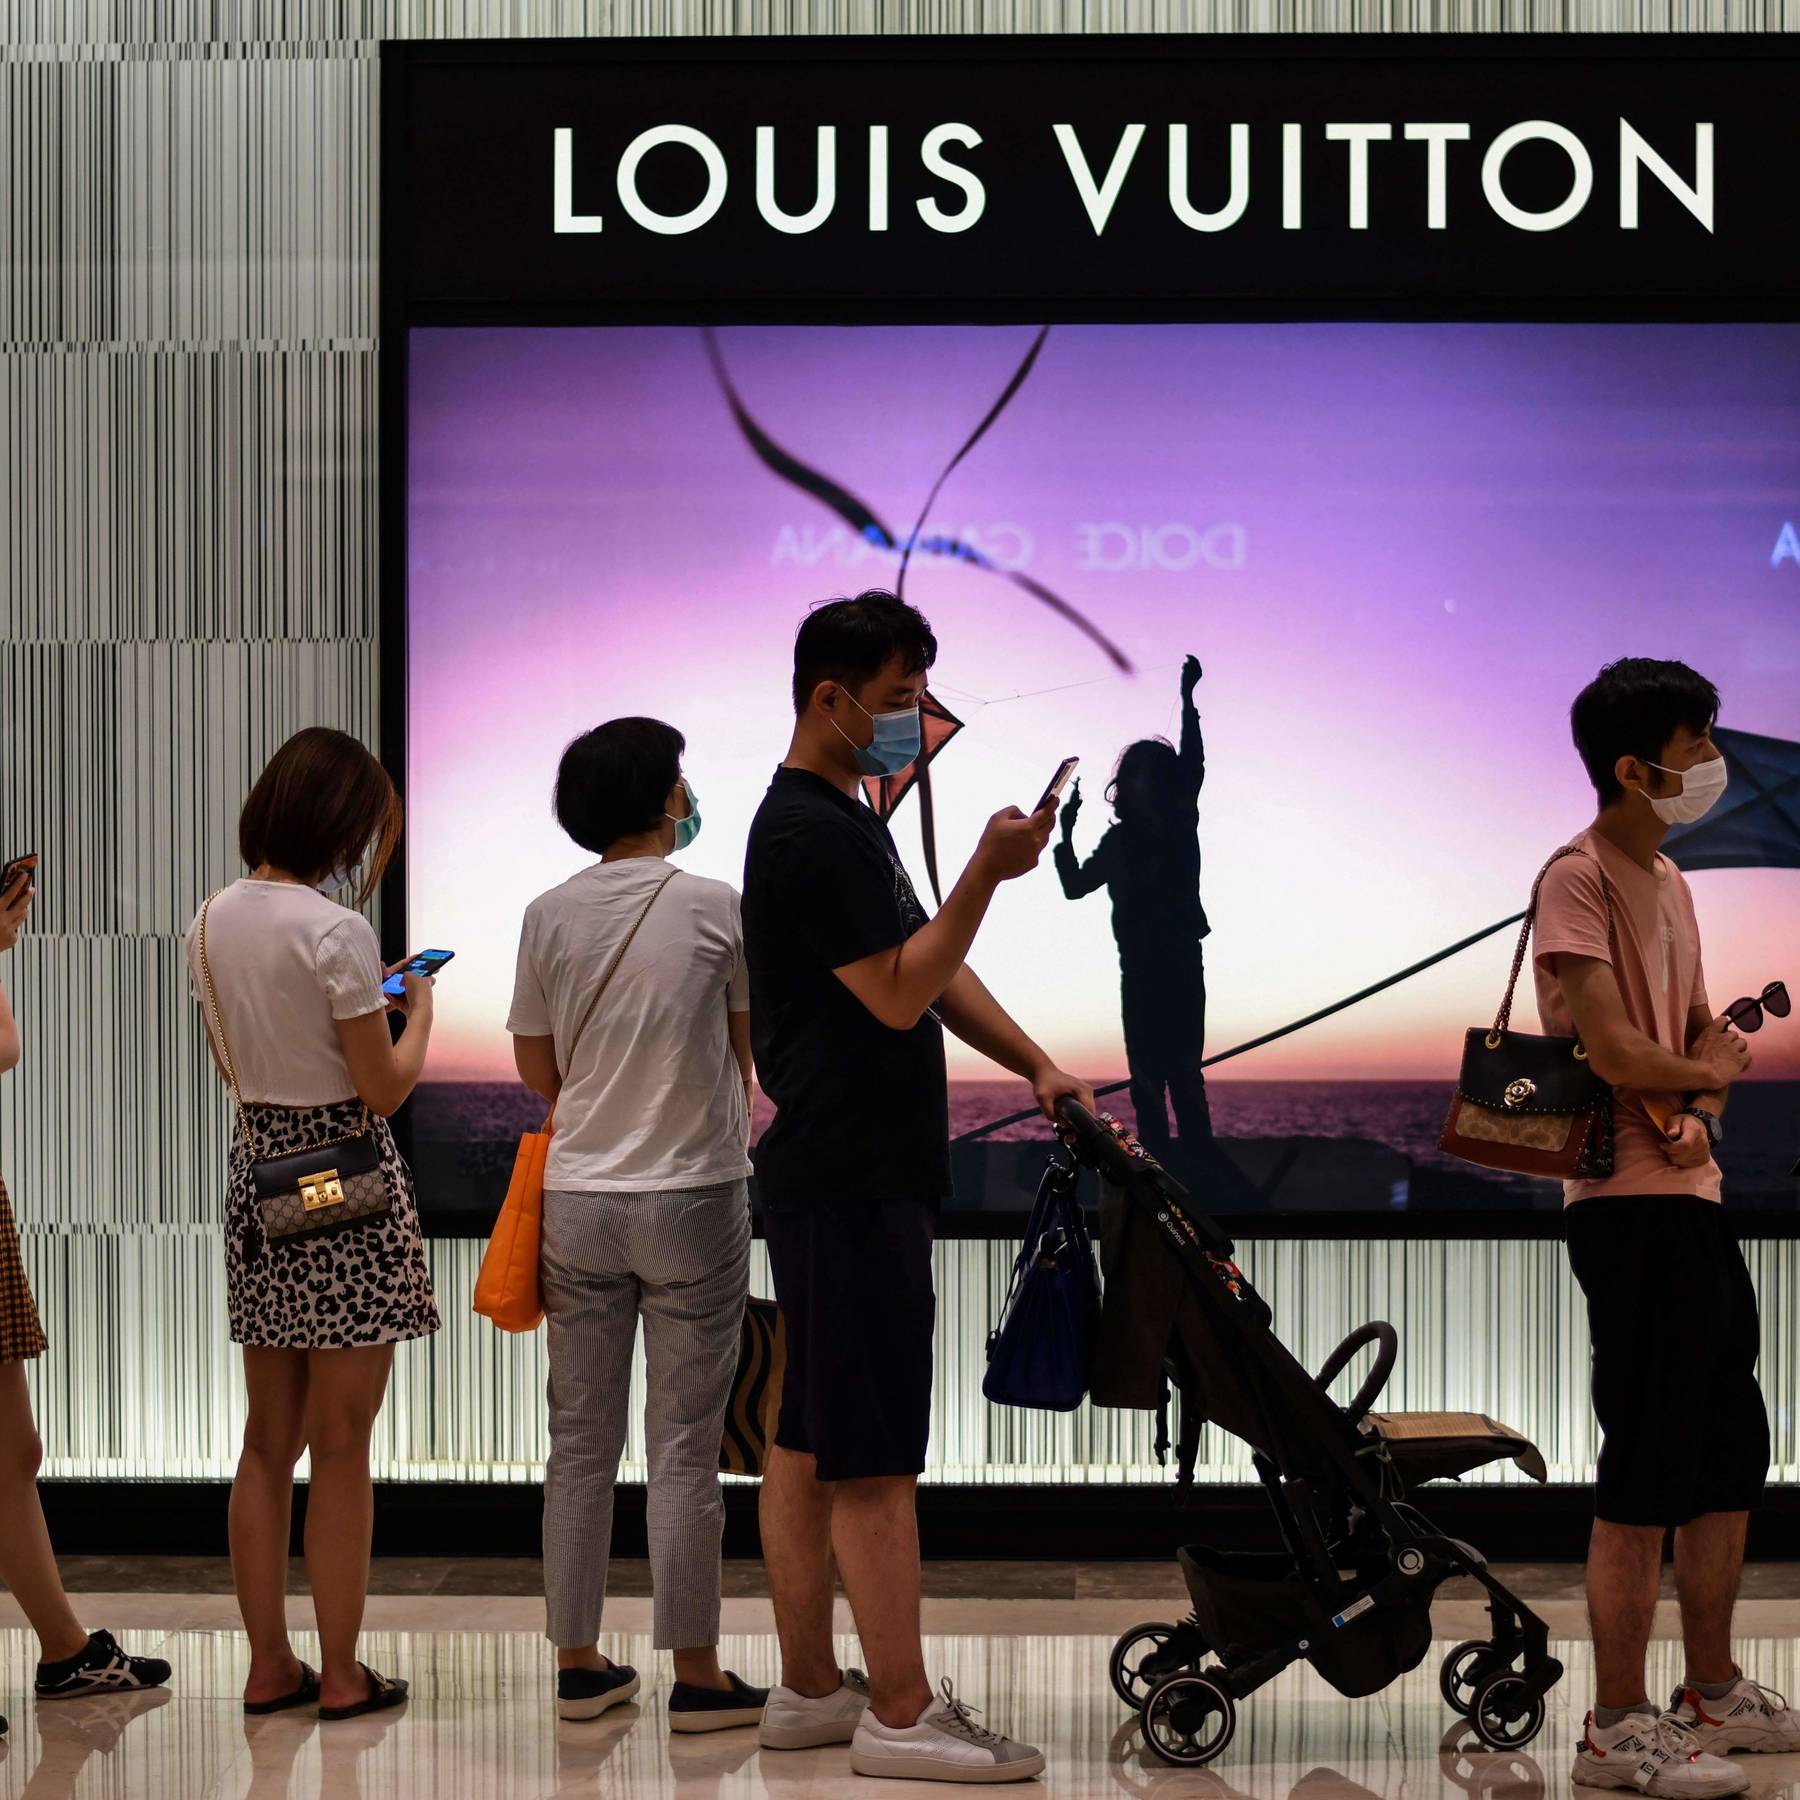 Louis Vuitton Launches a Video Game to Target Young Consumers